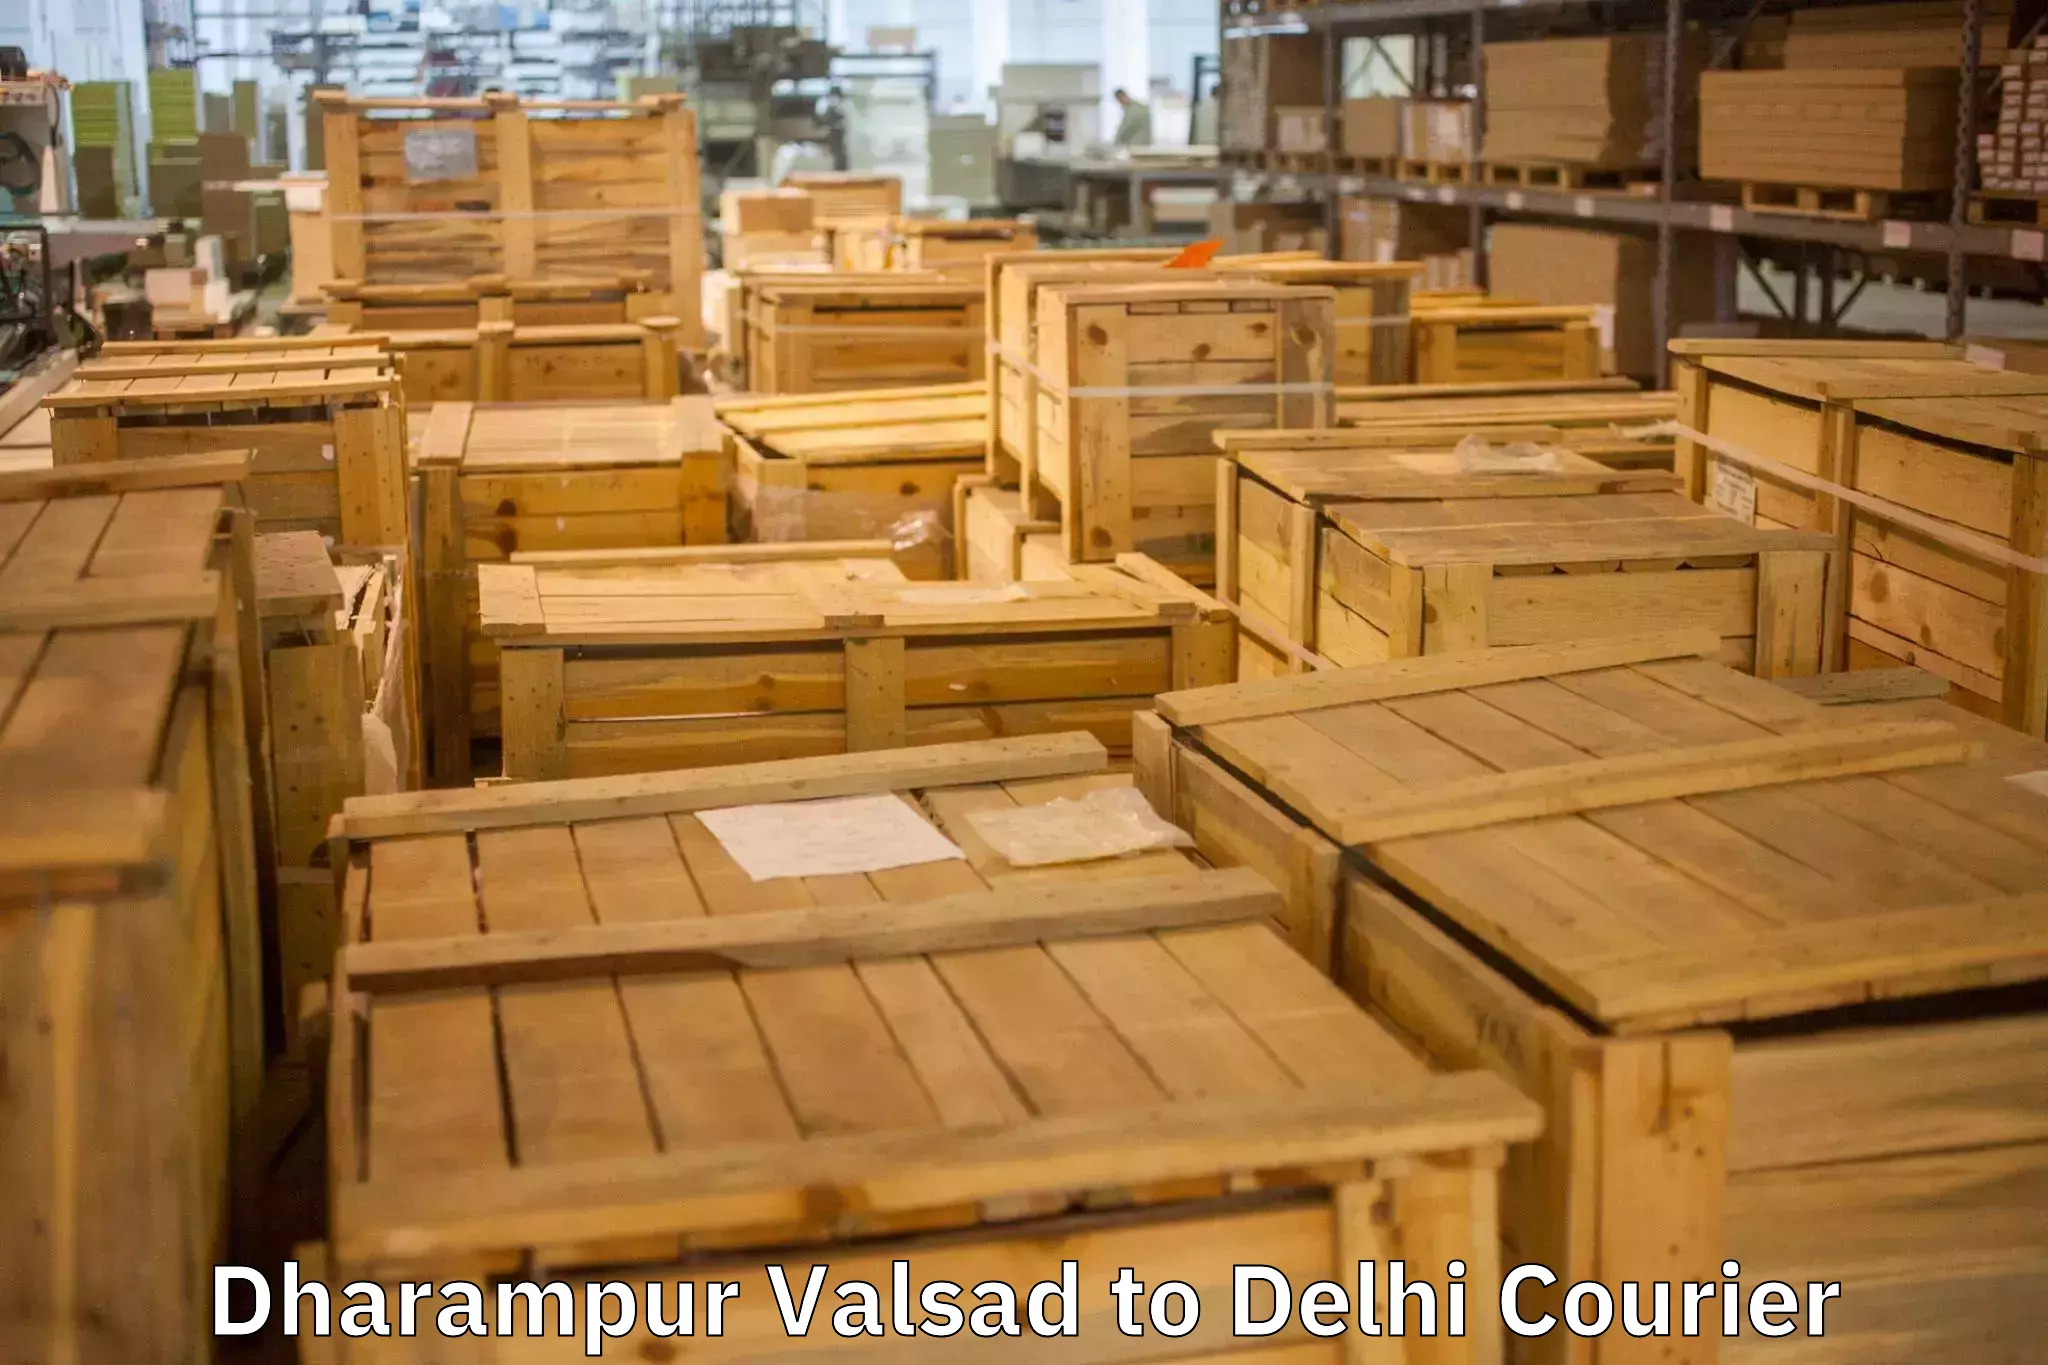 Professional home movers Dharampur Valsad to Delhi